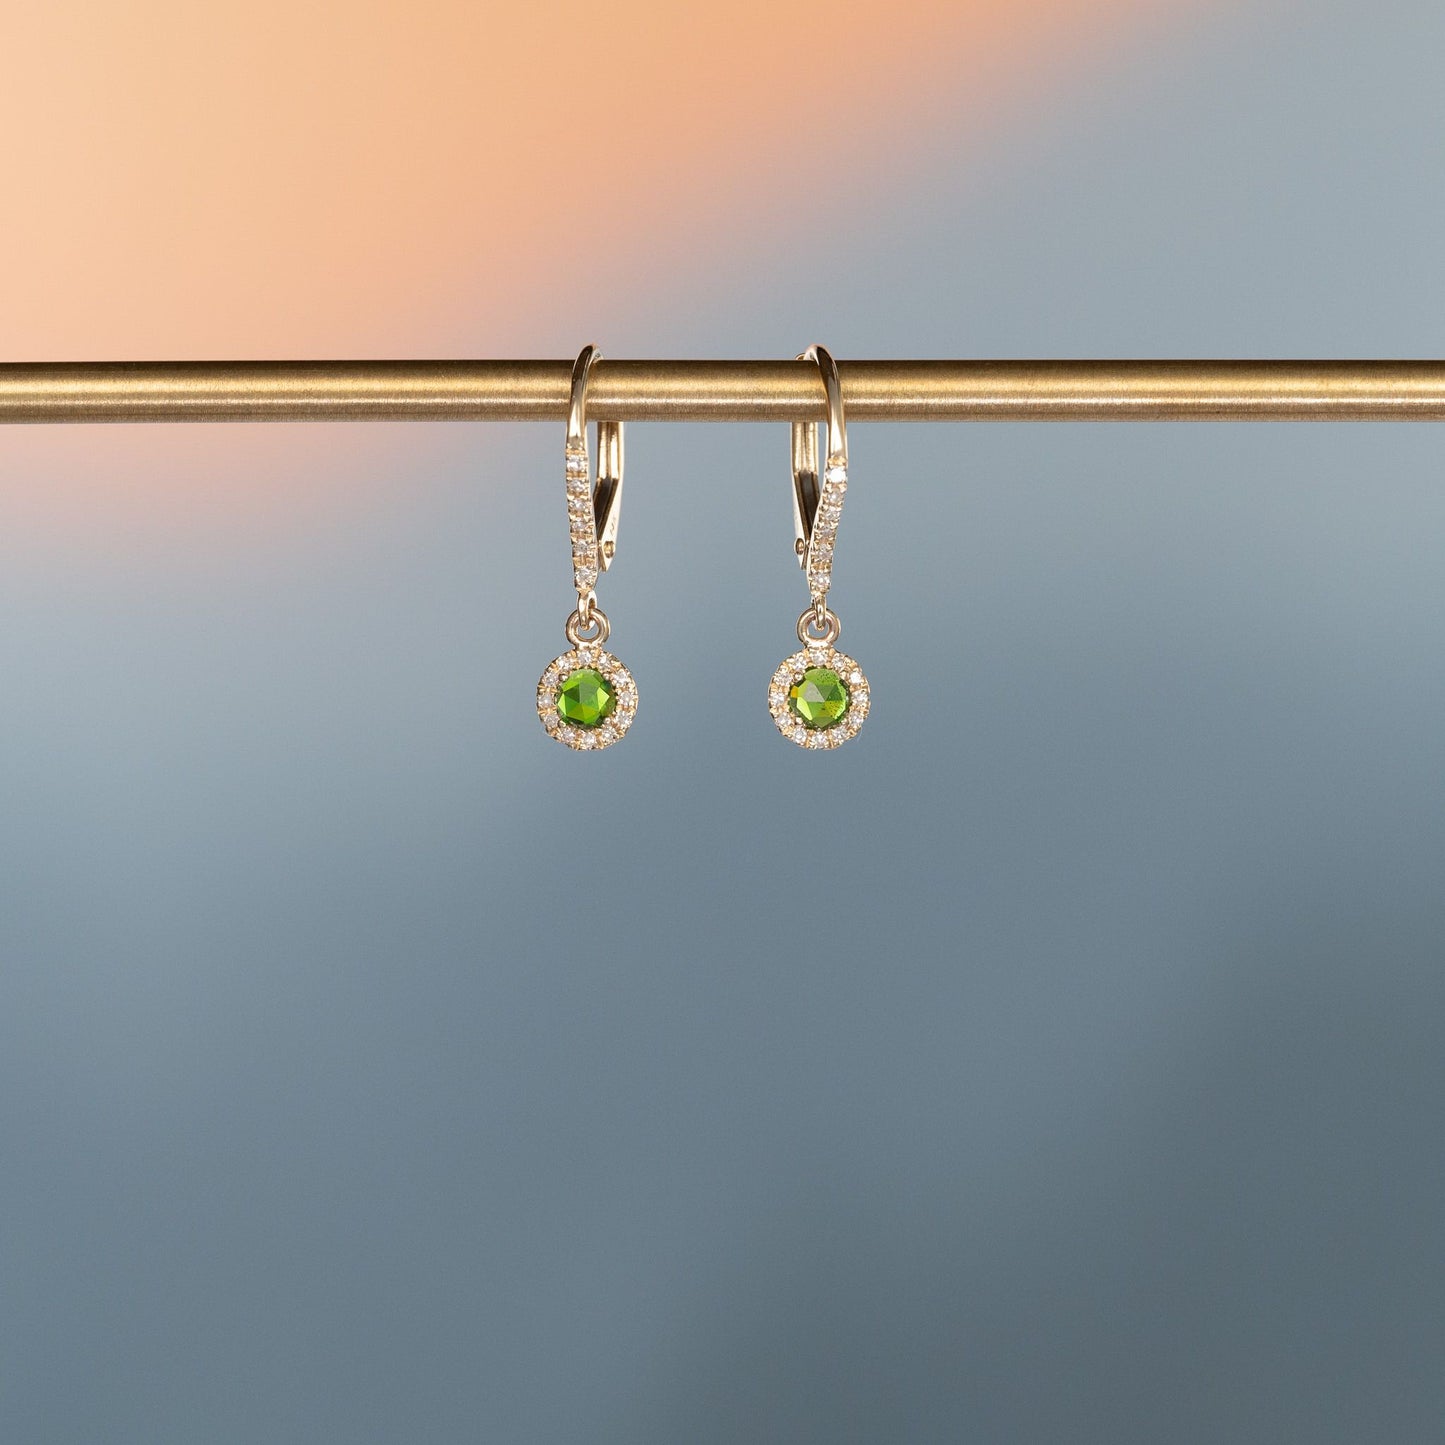 Load image into Gallery viewer, LIVEN 14K Yellow Gold Rosie Chrome Diopside Earrings
